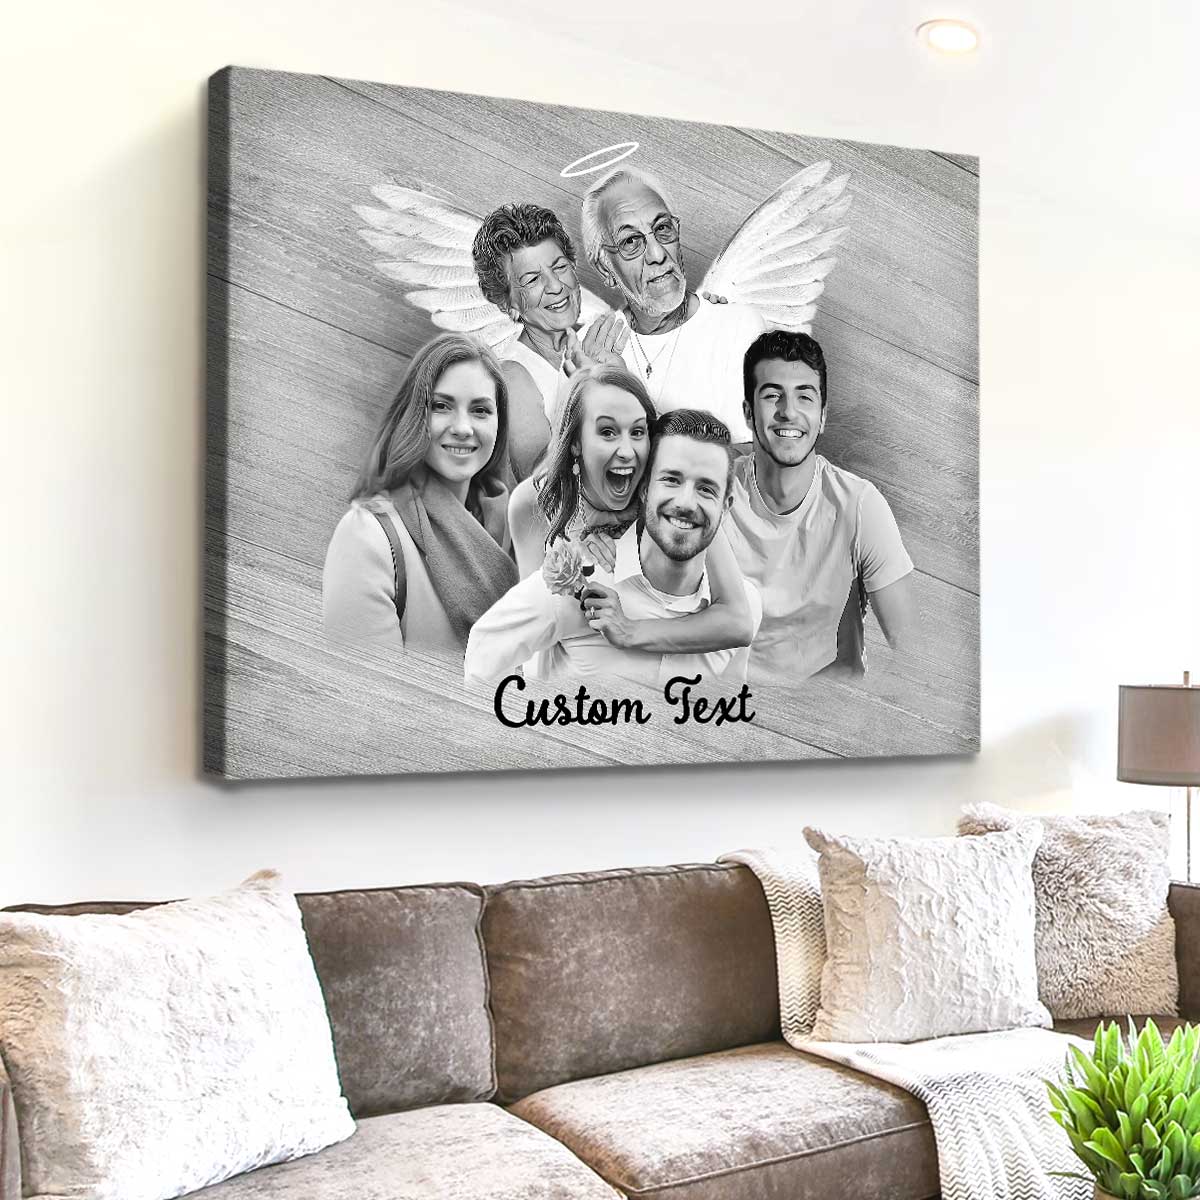 15 UNIQUE AND CREATIVE FAMILY PORTRAIT GIFTS - hello, Wonderful